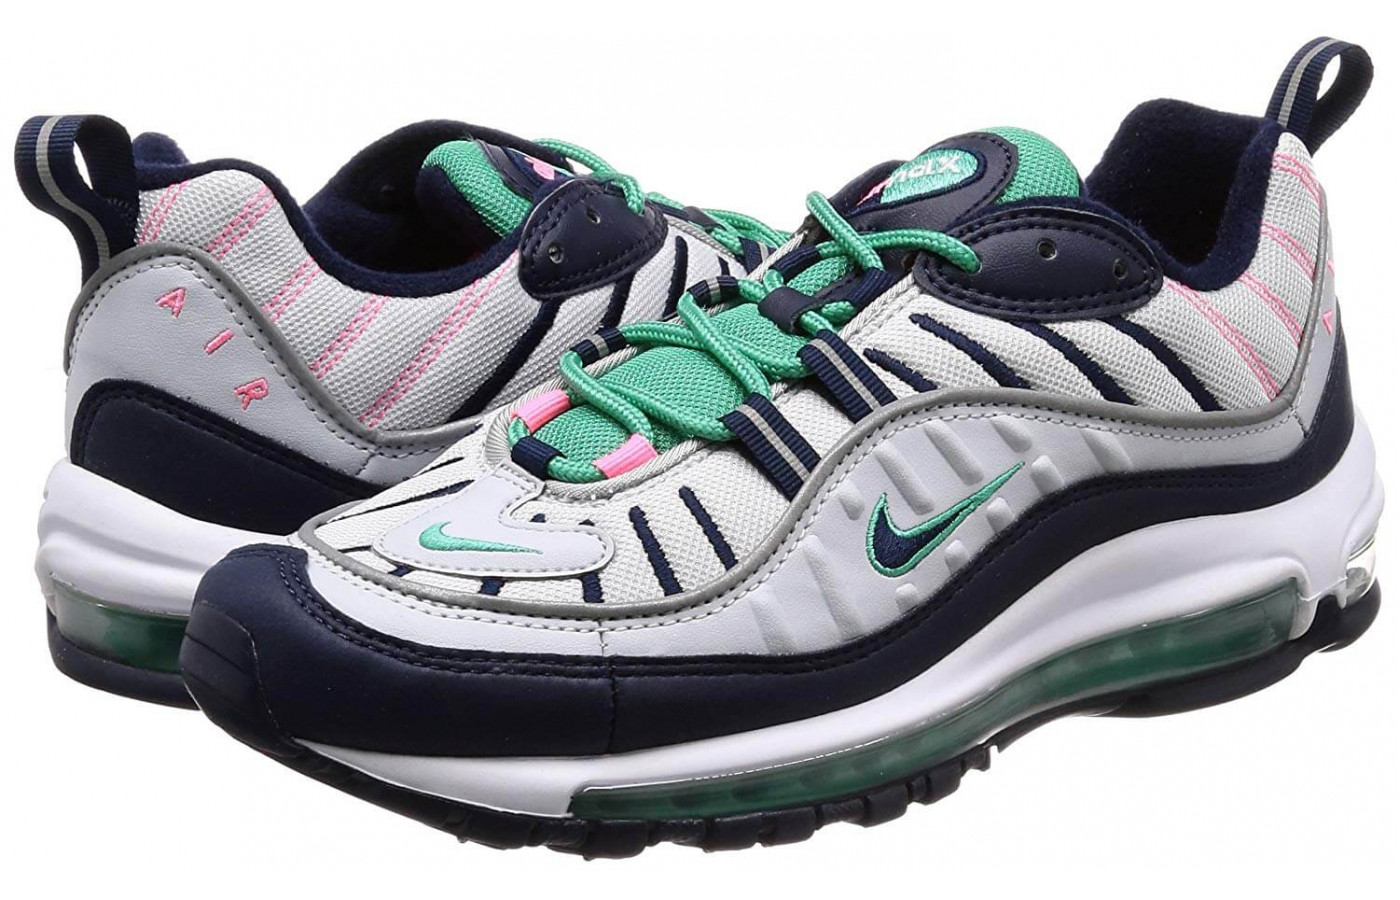 Nike Air Max 98 left right